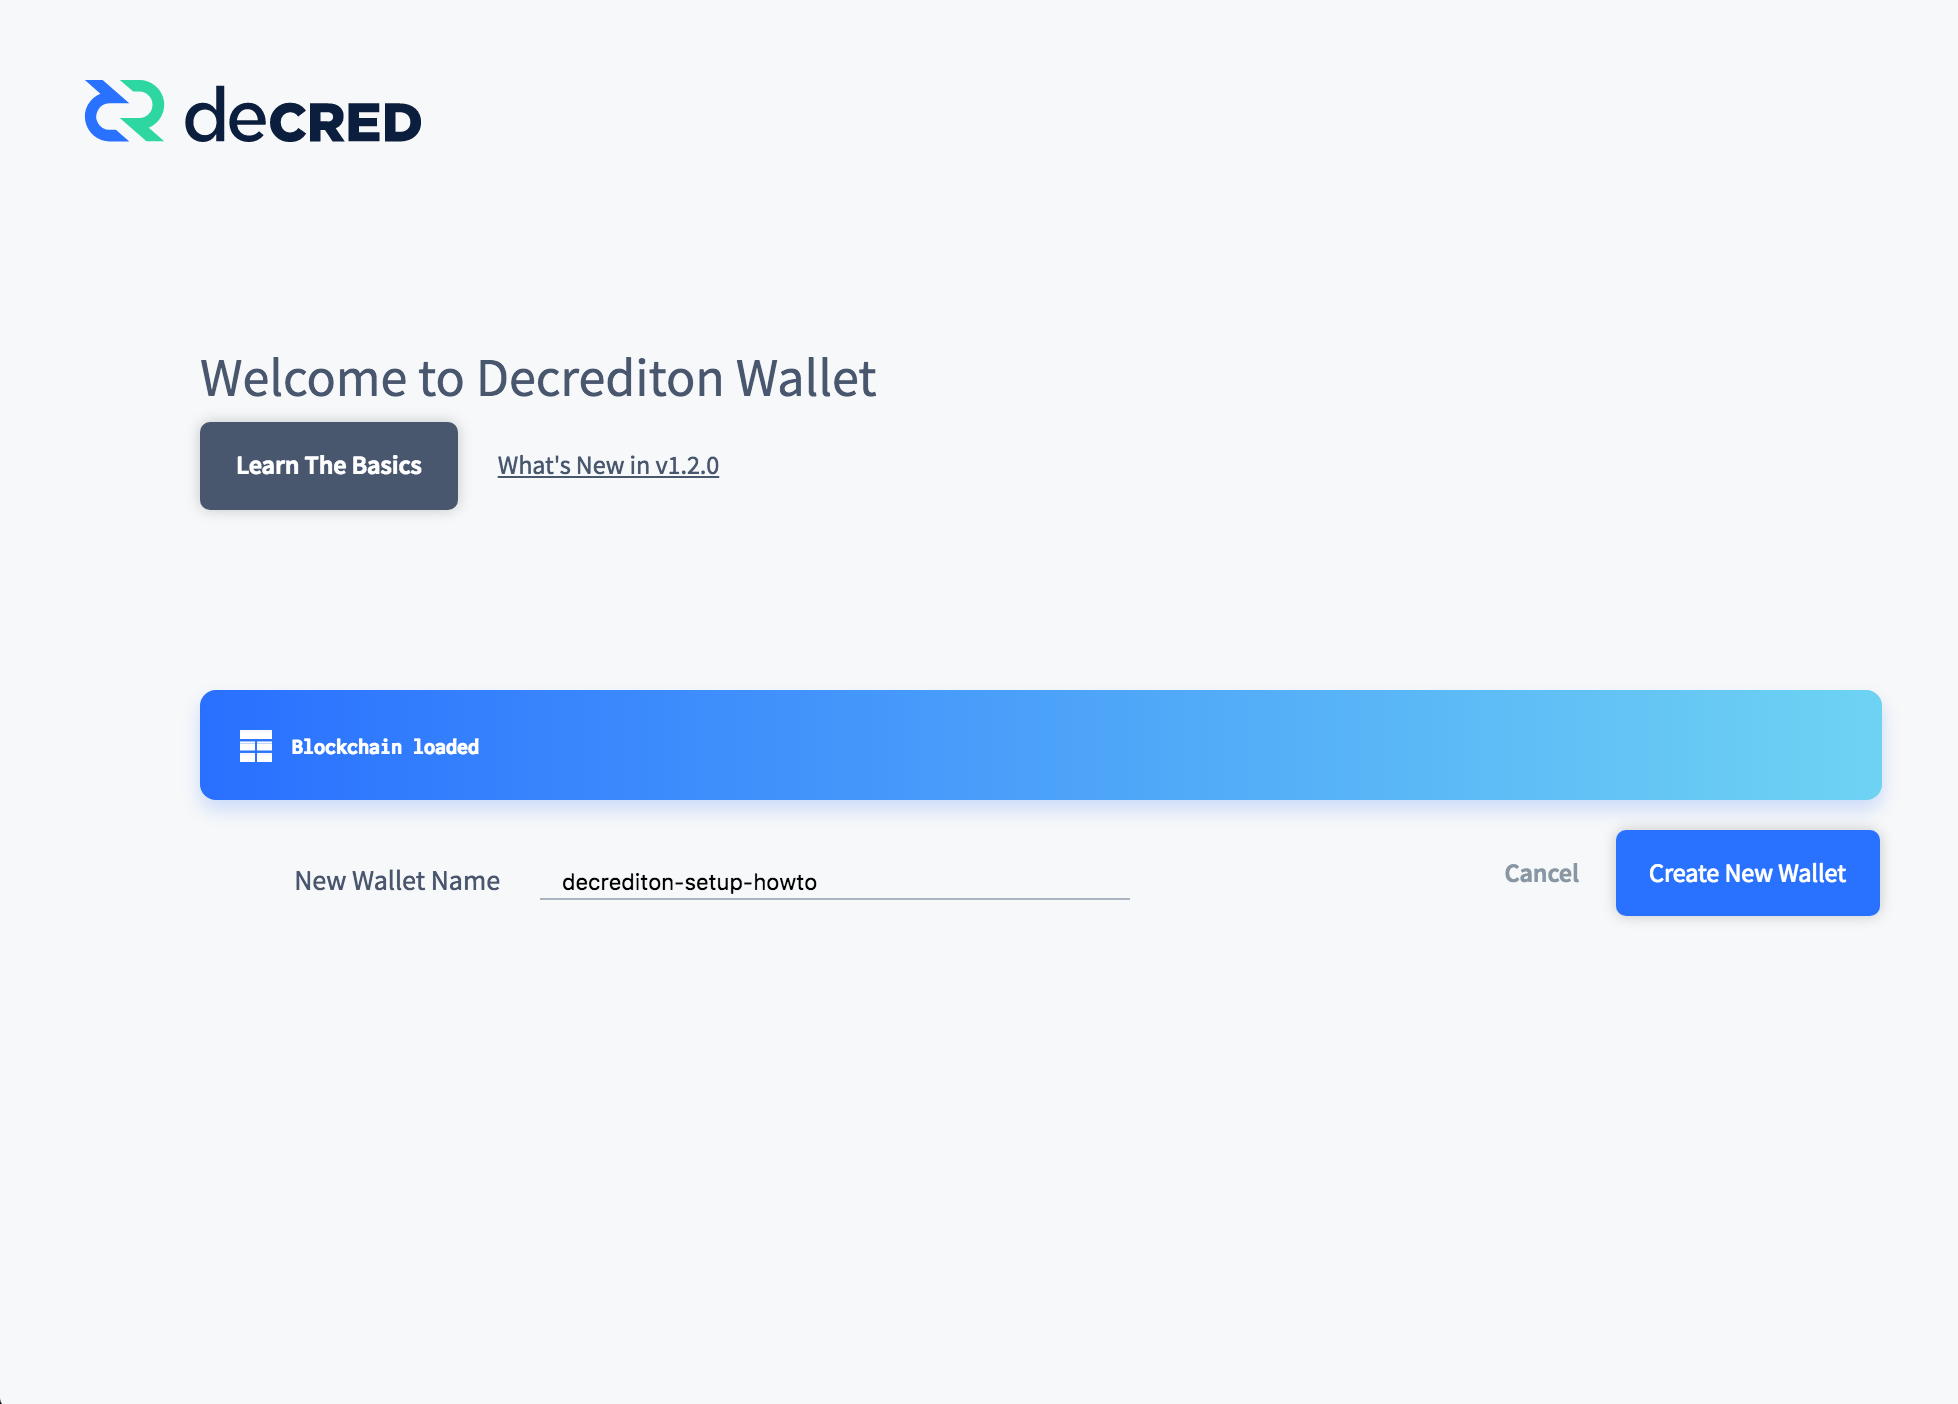 Figure 5 - Create a New Wallet